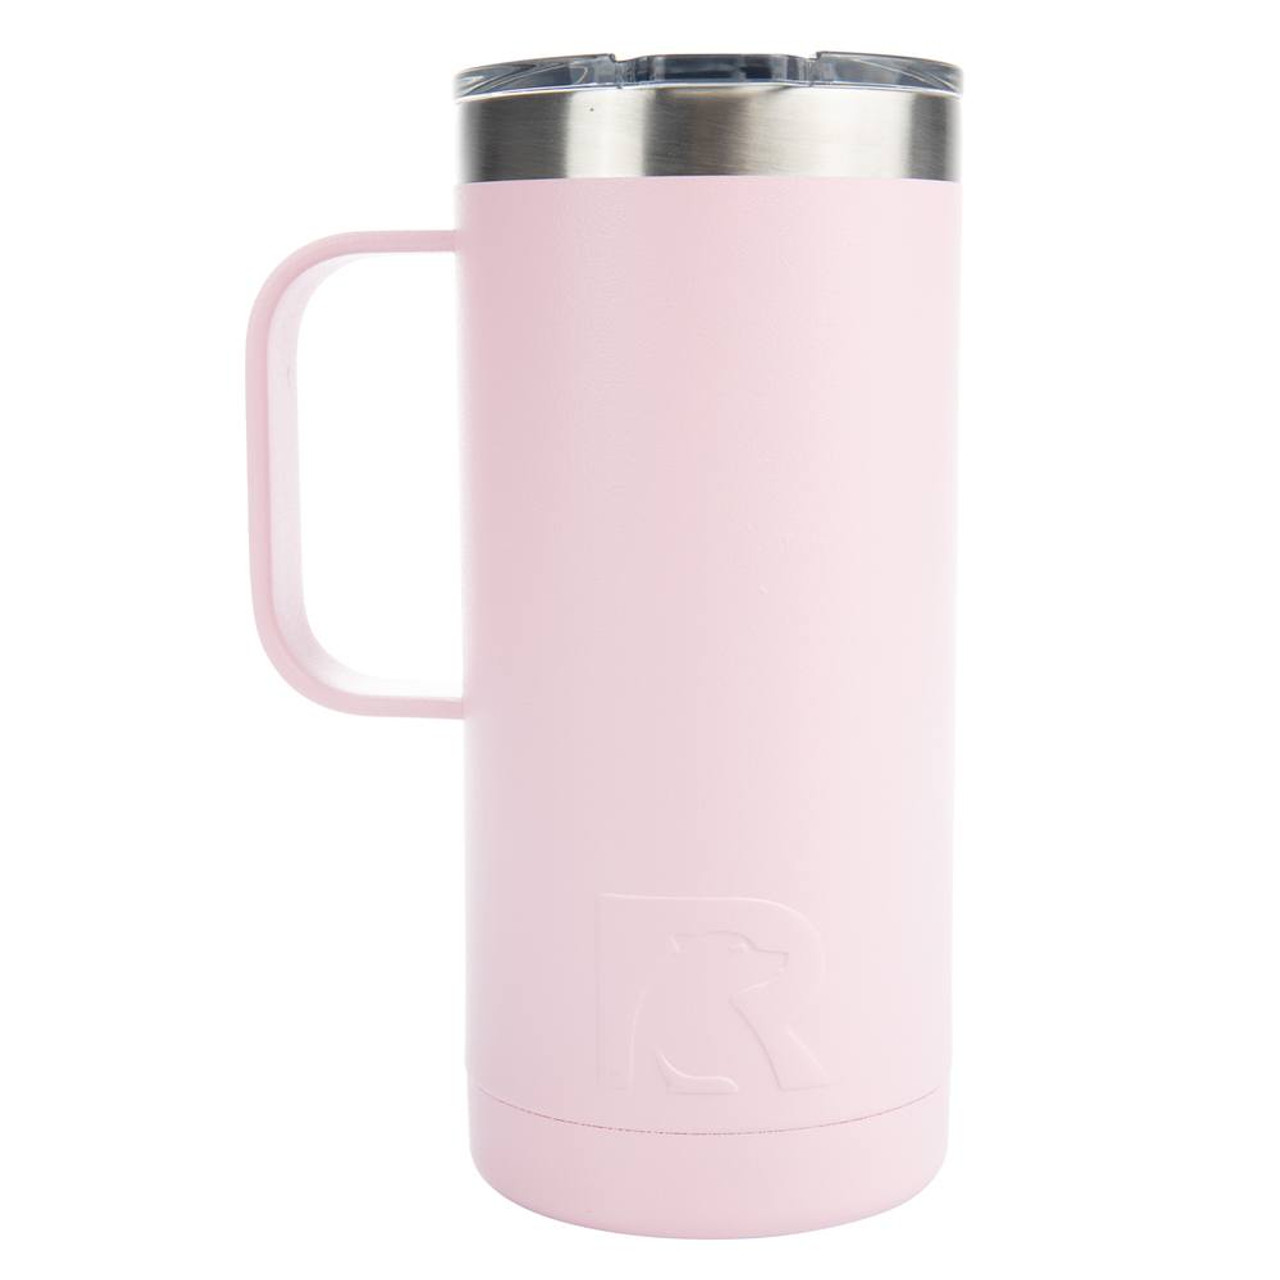 RTIC 32oz Bottle, Flamingo, Matte, Stainless Steel & Vacuum Insulated